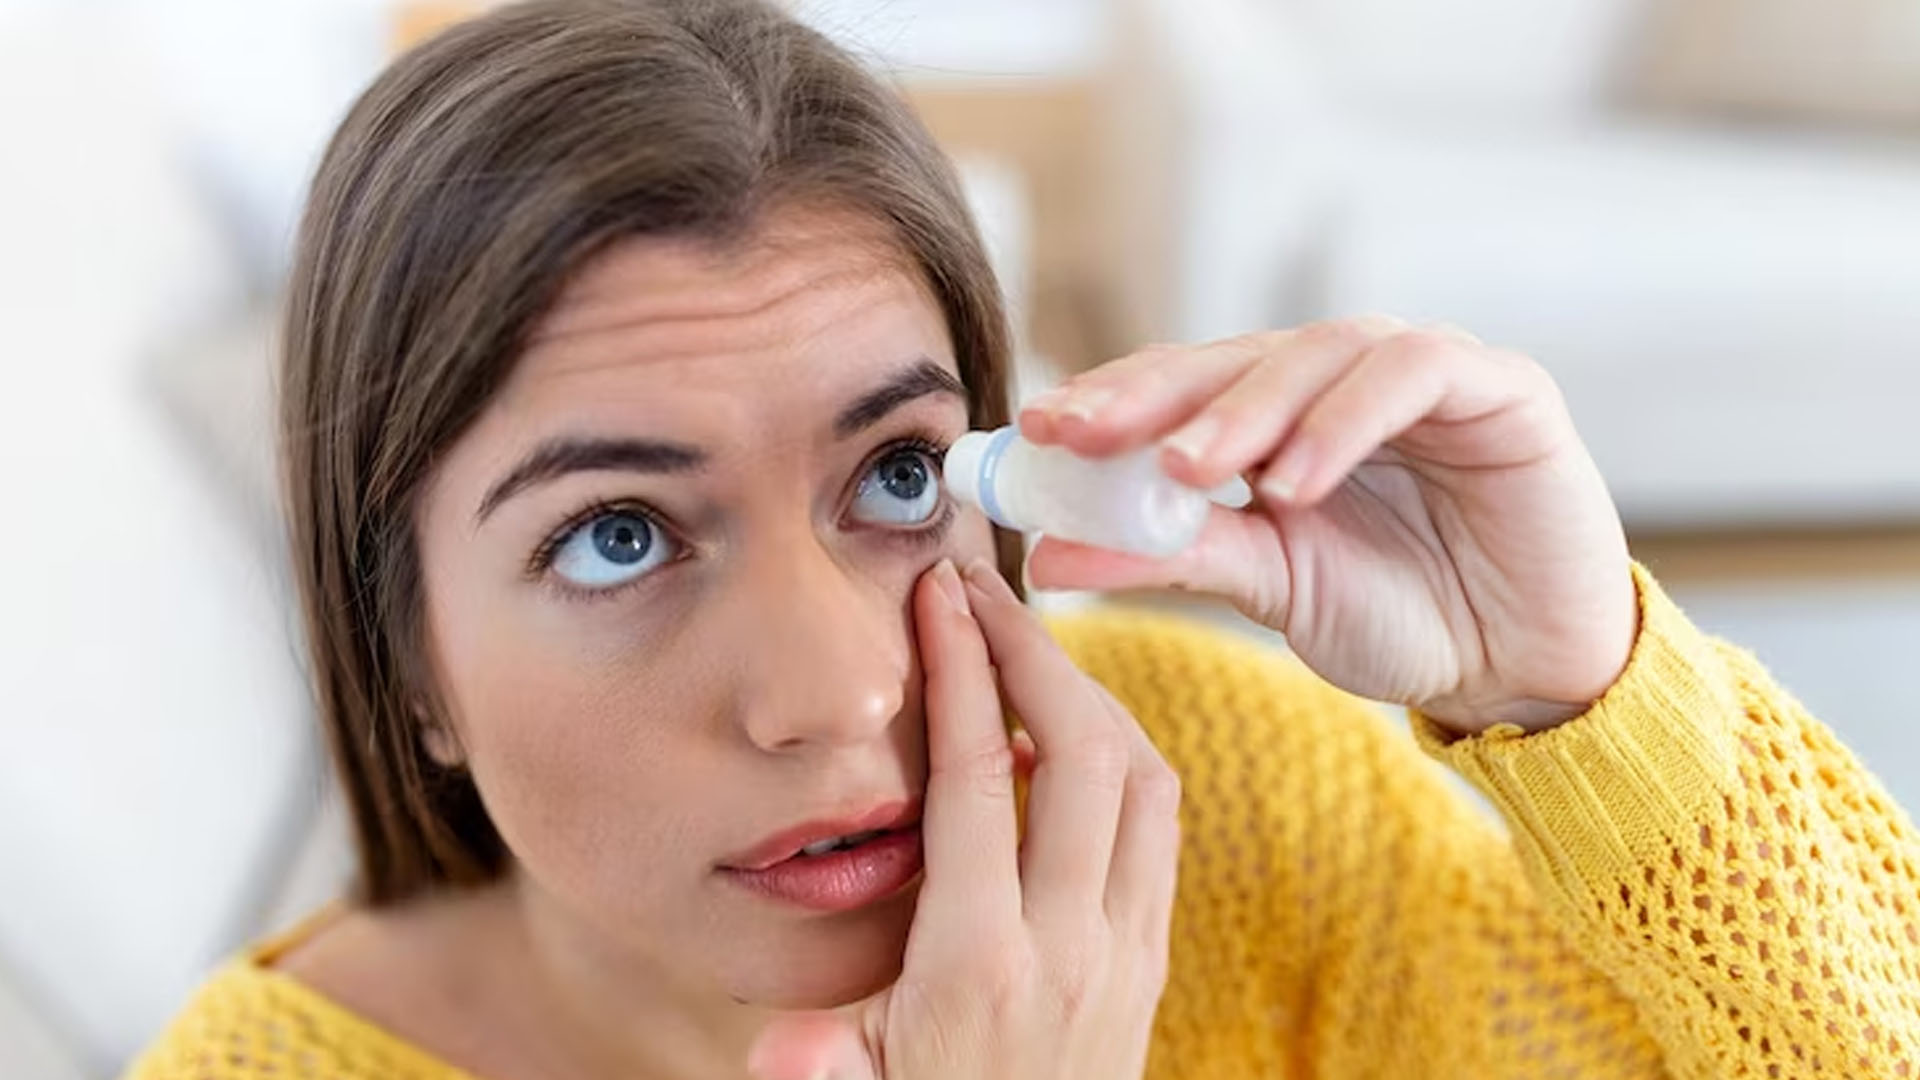 What are the Home Remedies for Eye Infections?